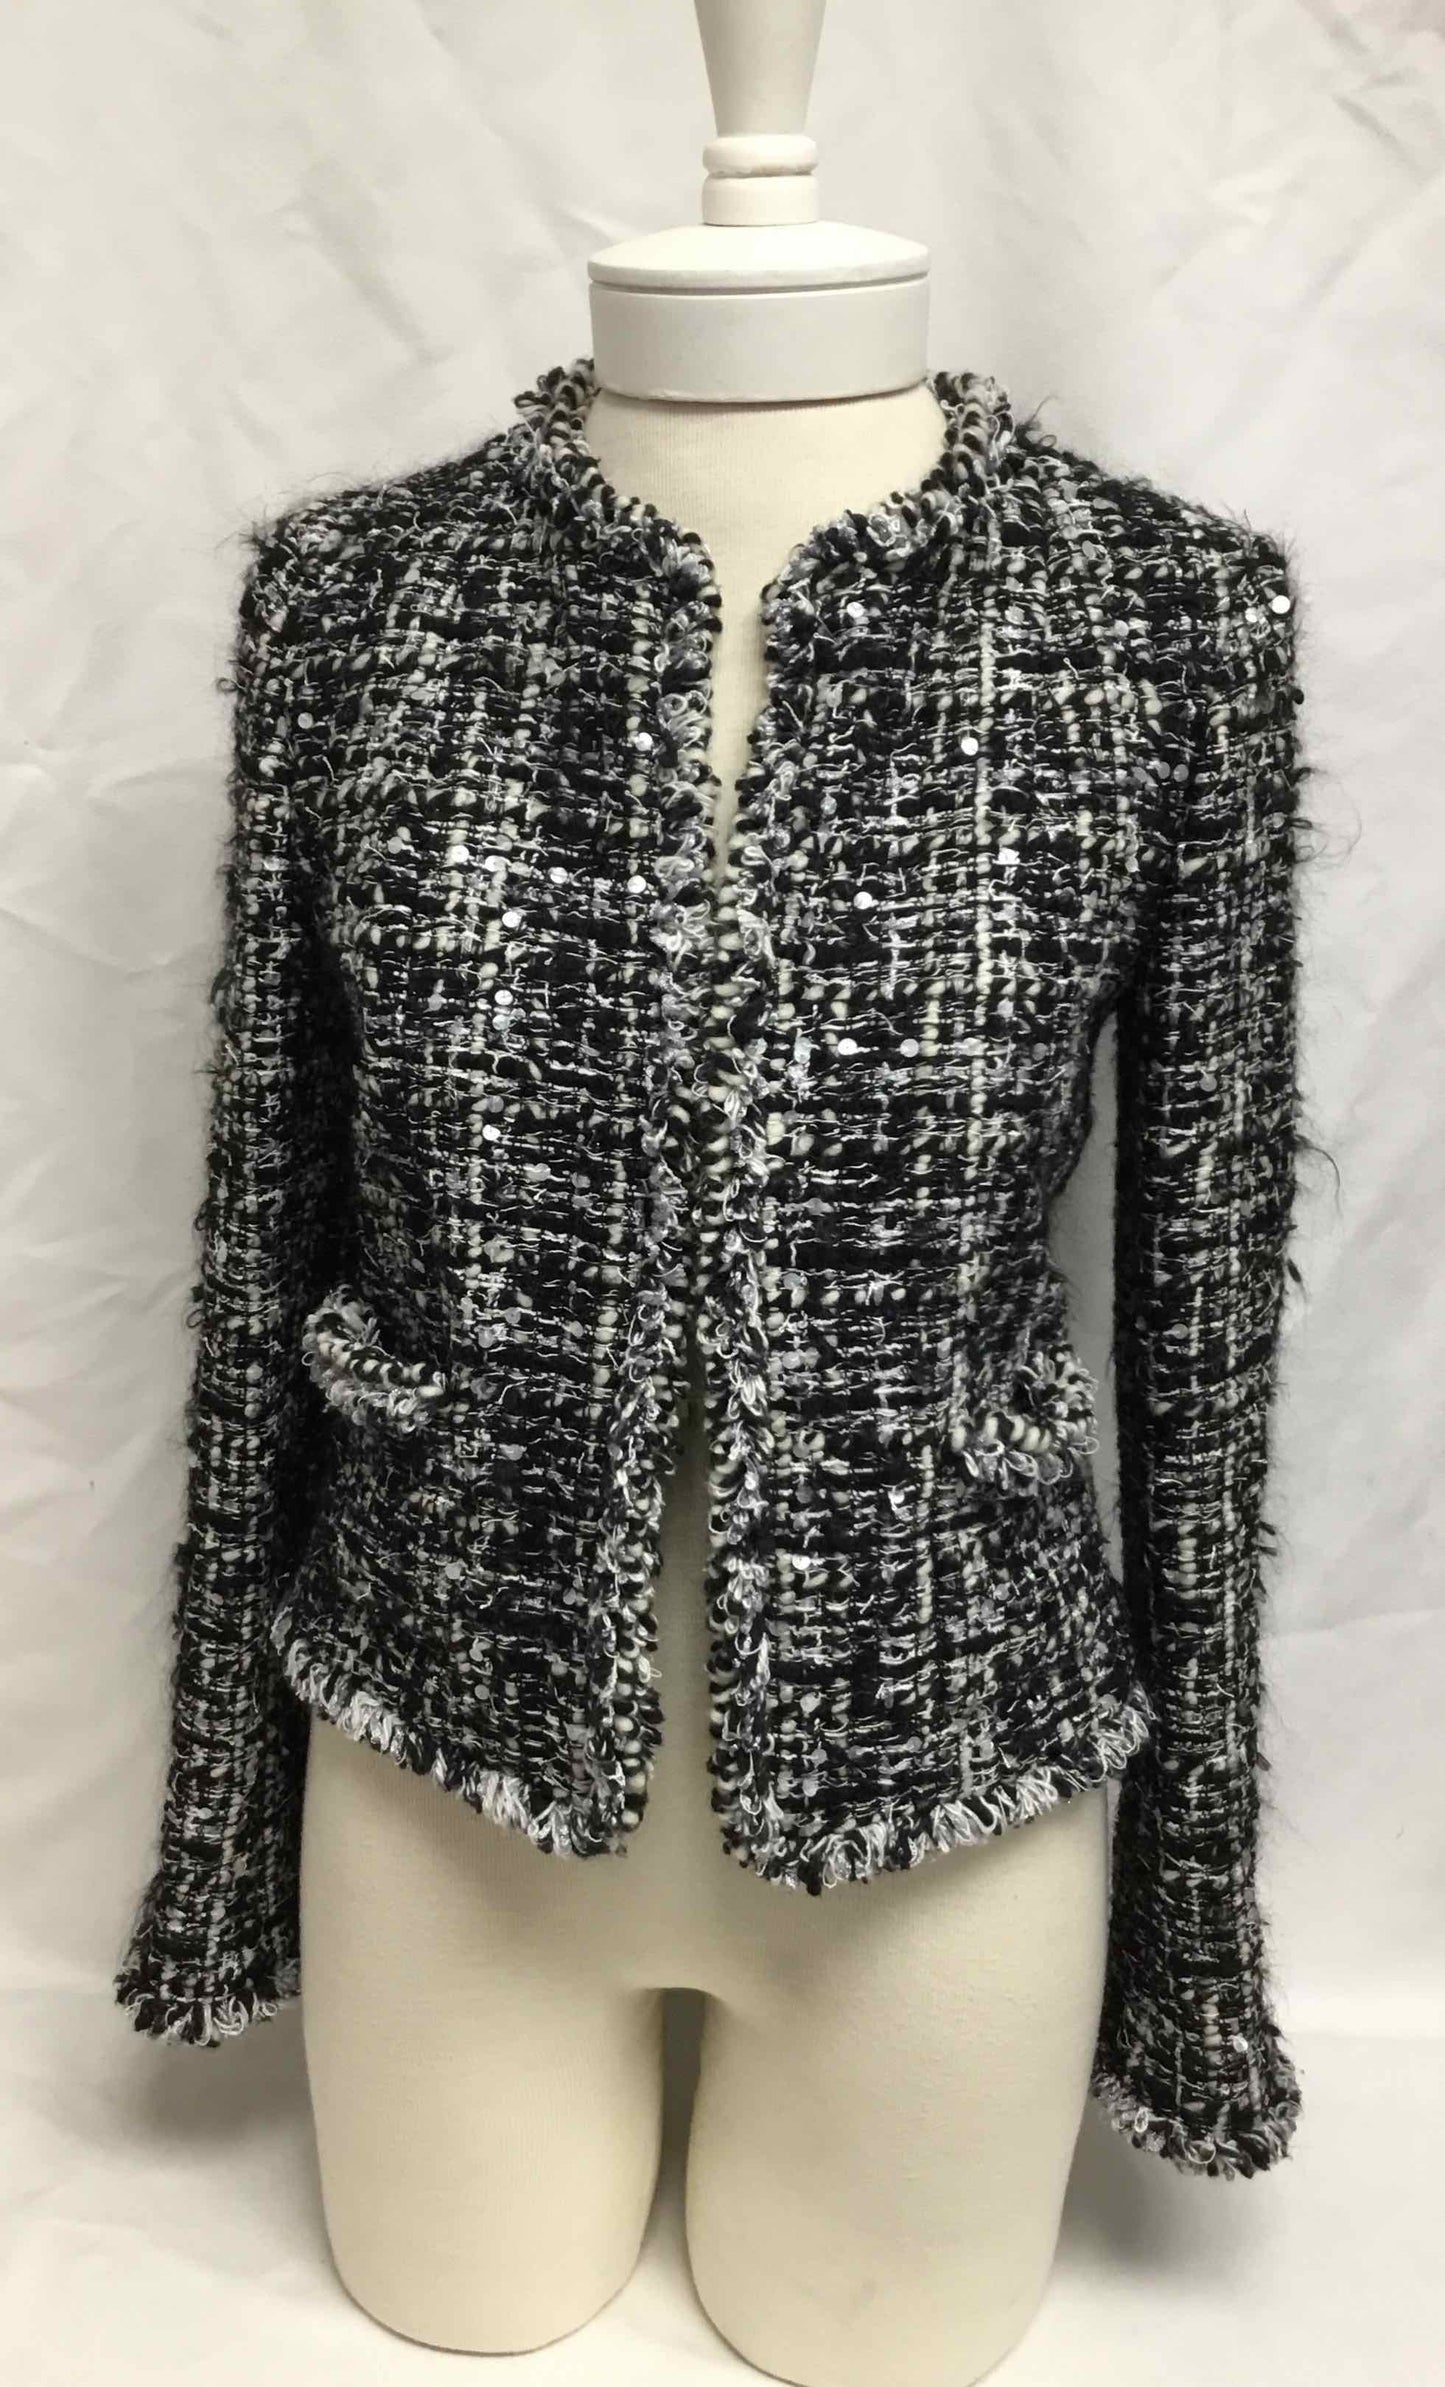 Chanel Black & White Tweed with Sequins Jacket